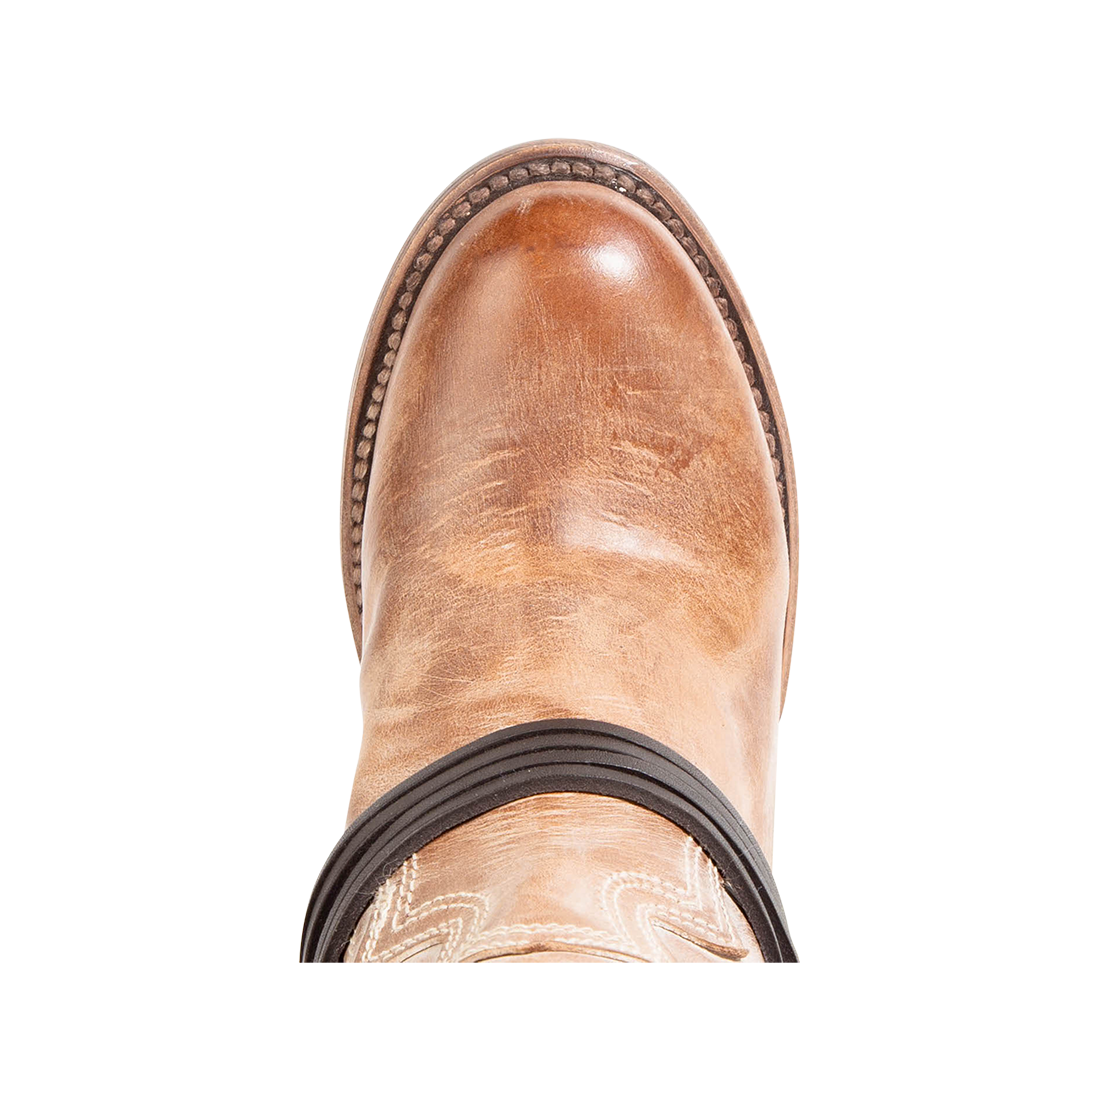 Top view showing round toe and leather ankle lacing on FREEBIRD by Steven women's Coal taupe tall boot